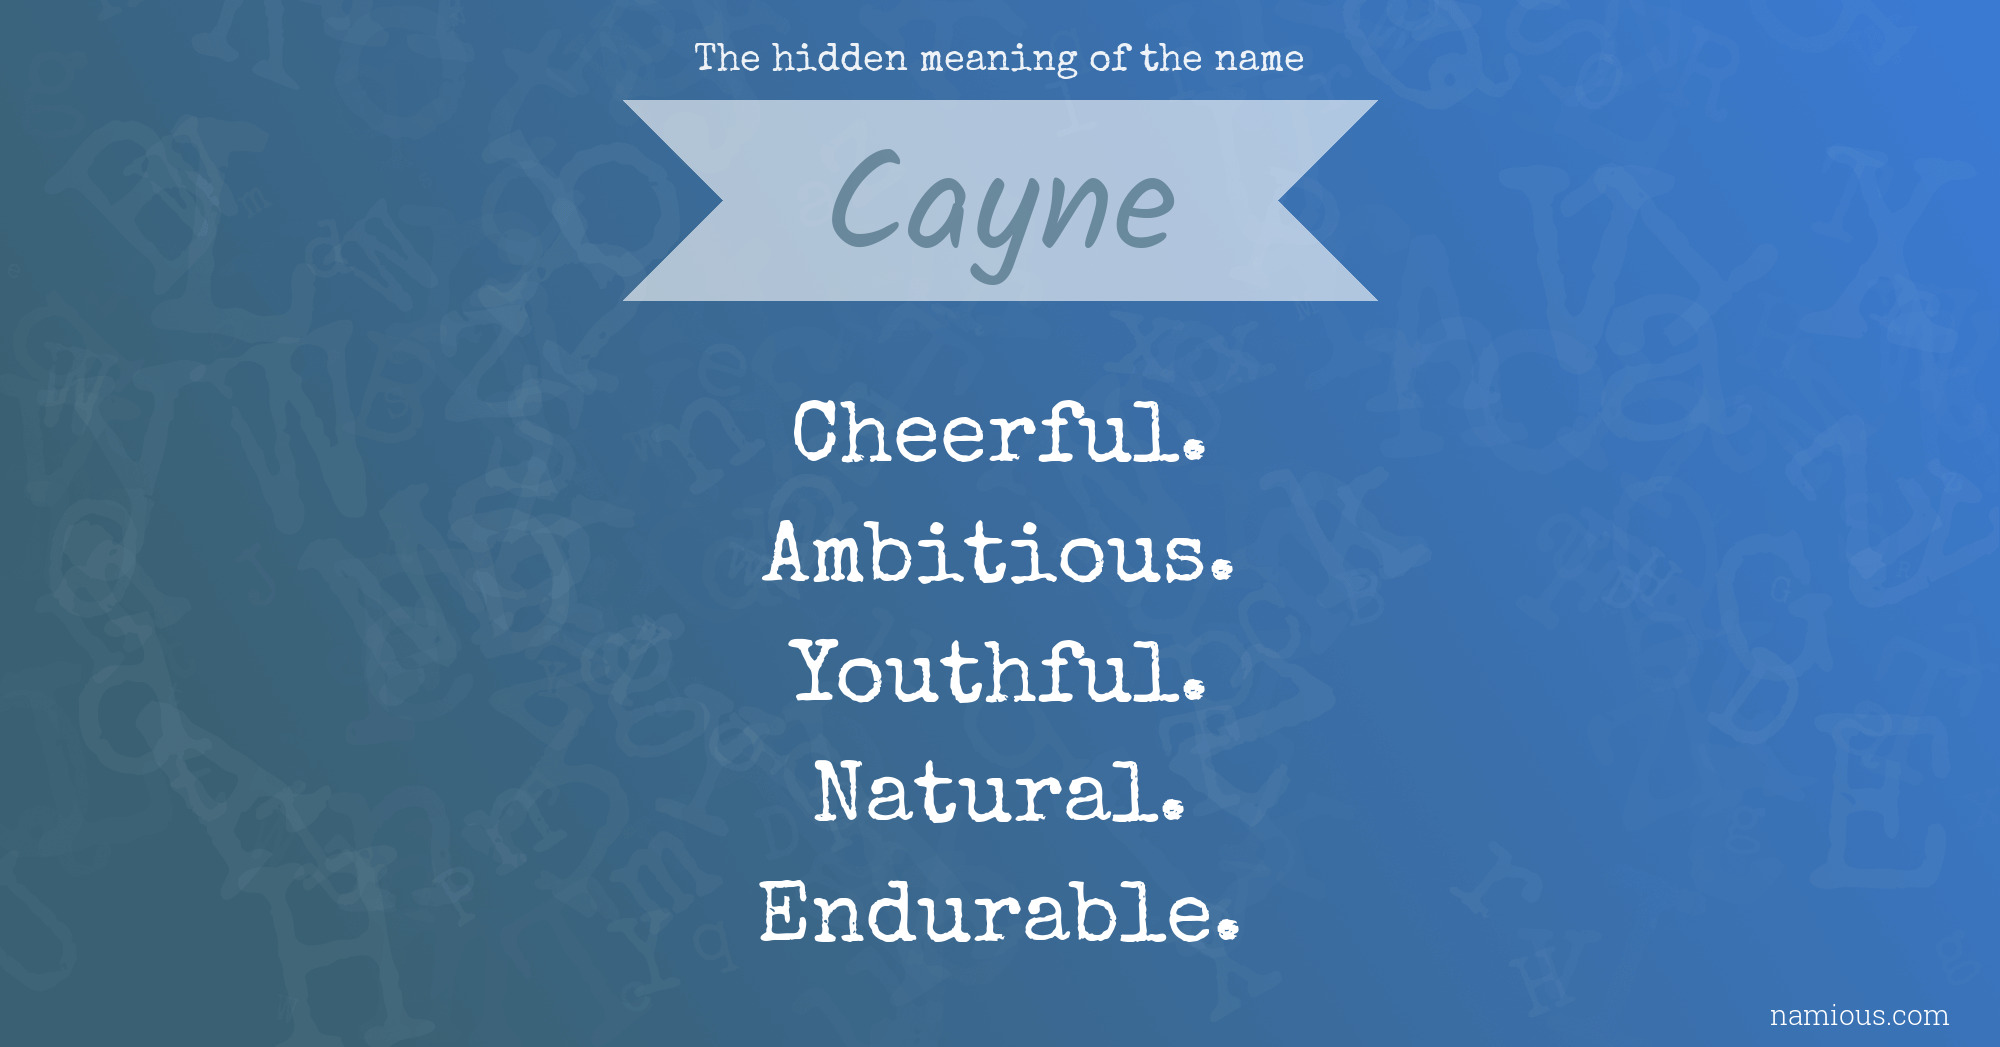 The hidden meaning of the name Cayne